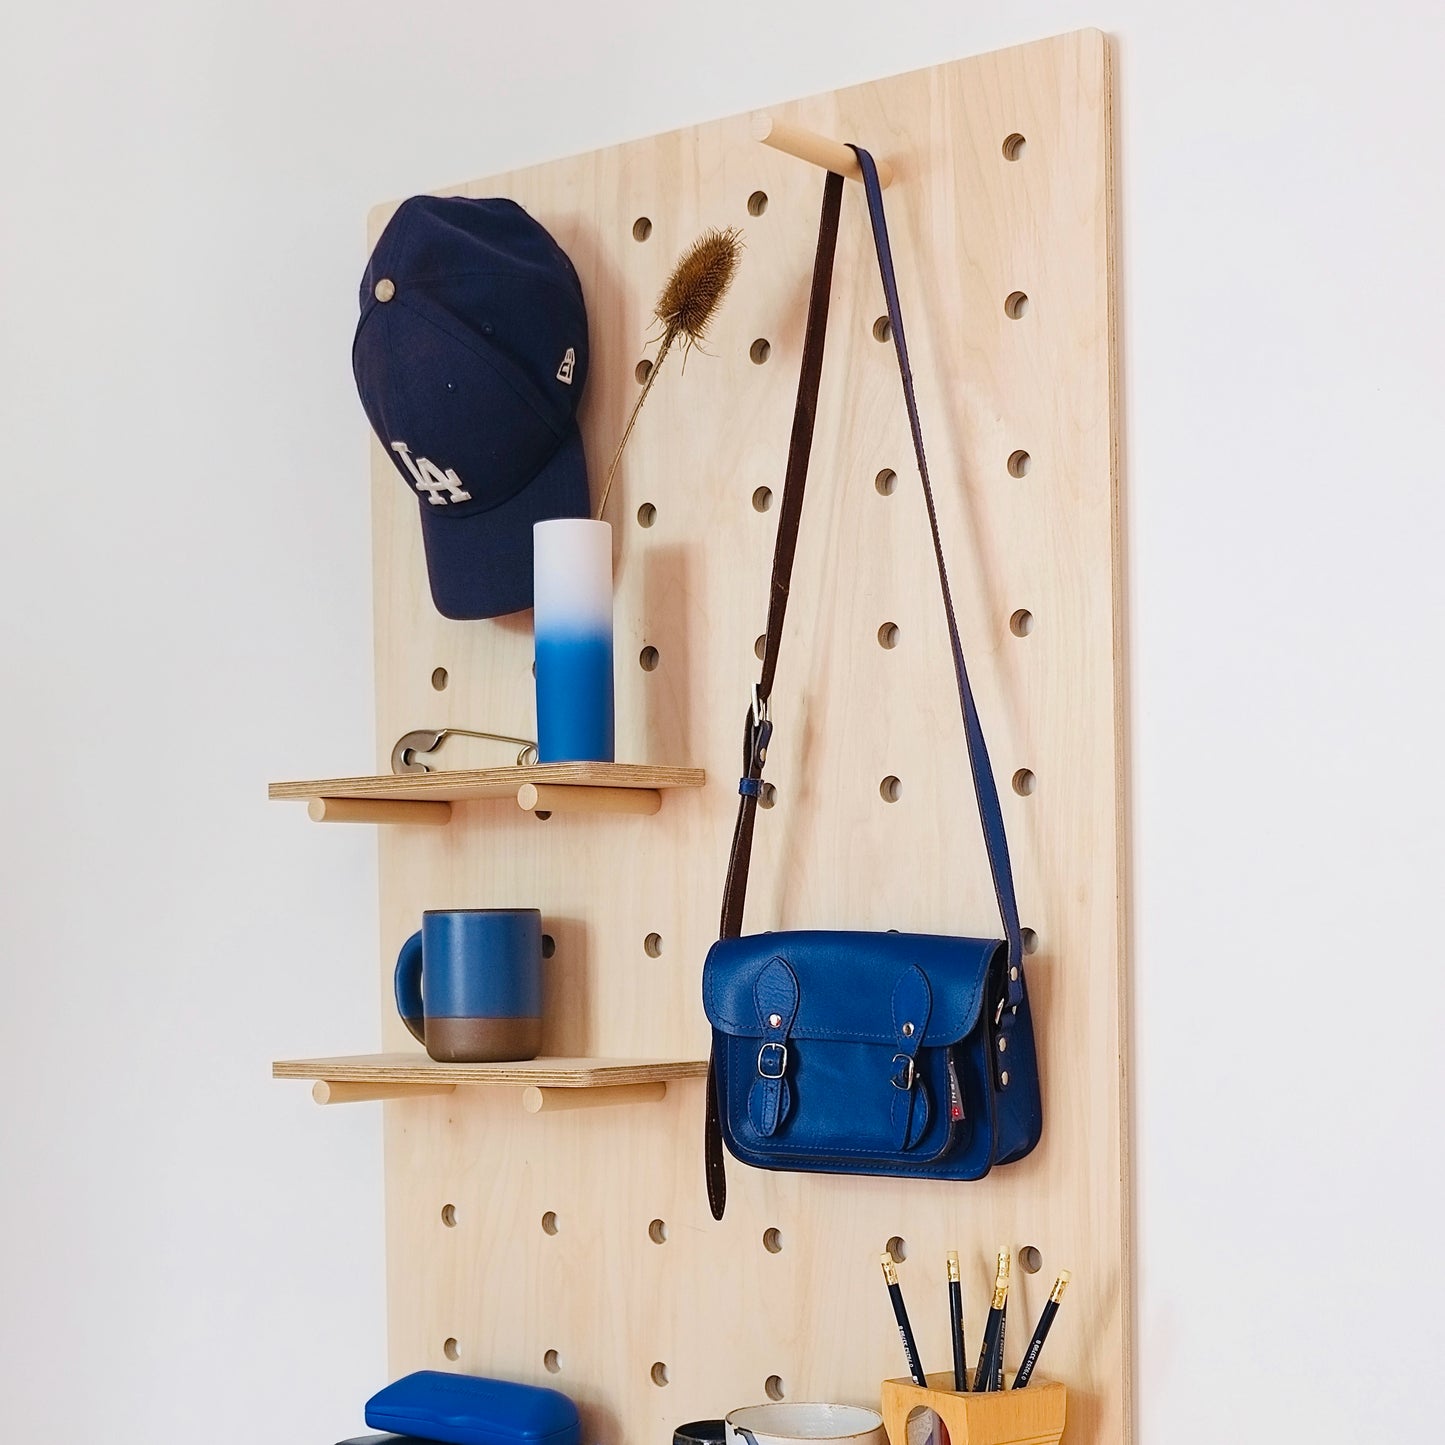 A large pale wooden pegboard with many drilled holes, two shelves & pegs faces diagonally to the left. Various blue accessories are displayed on the board.